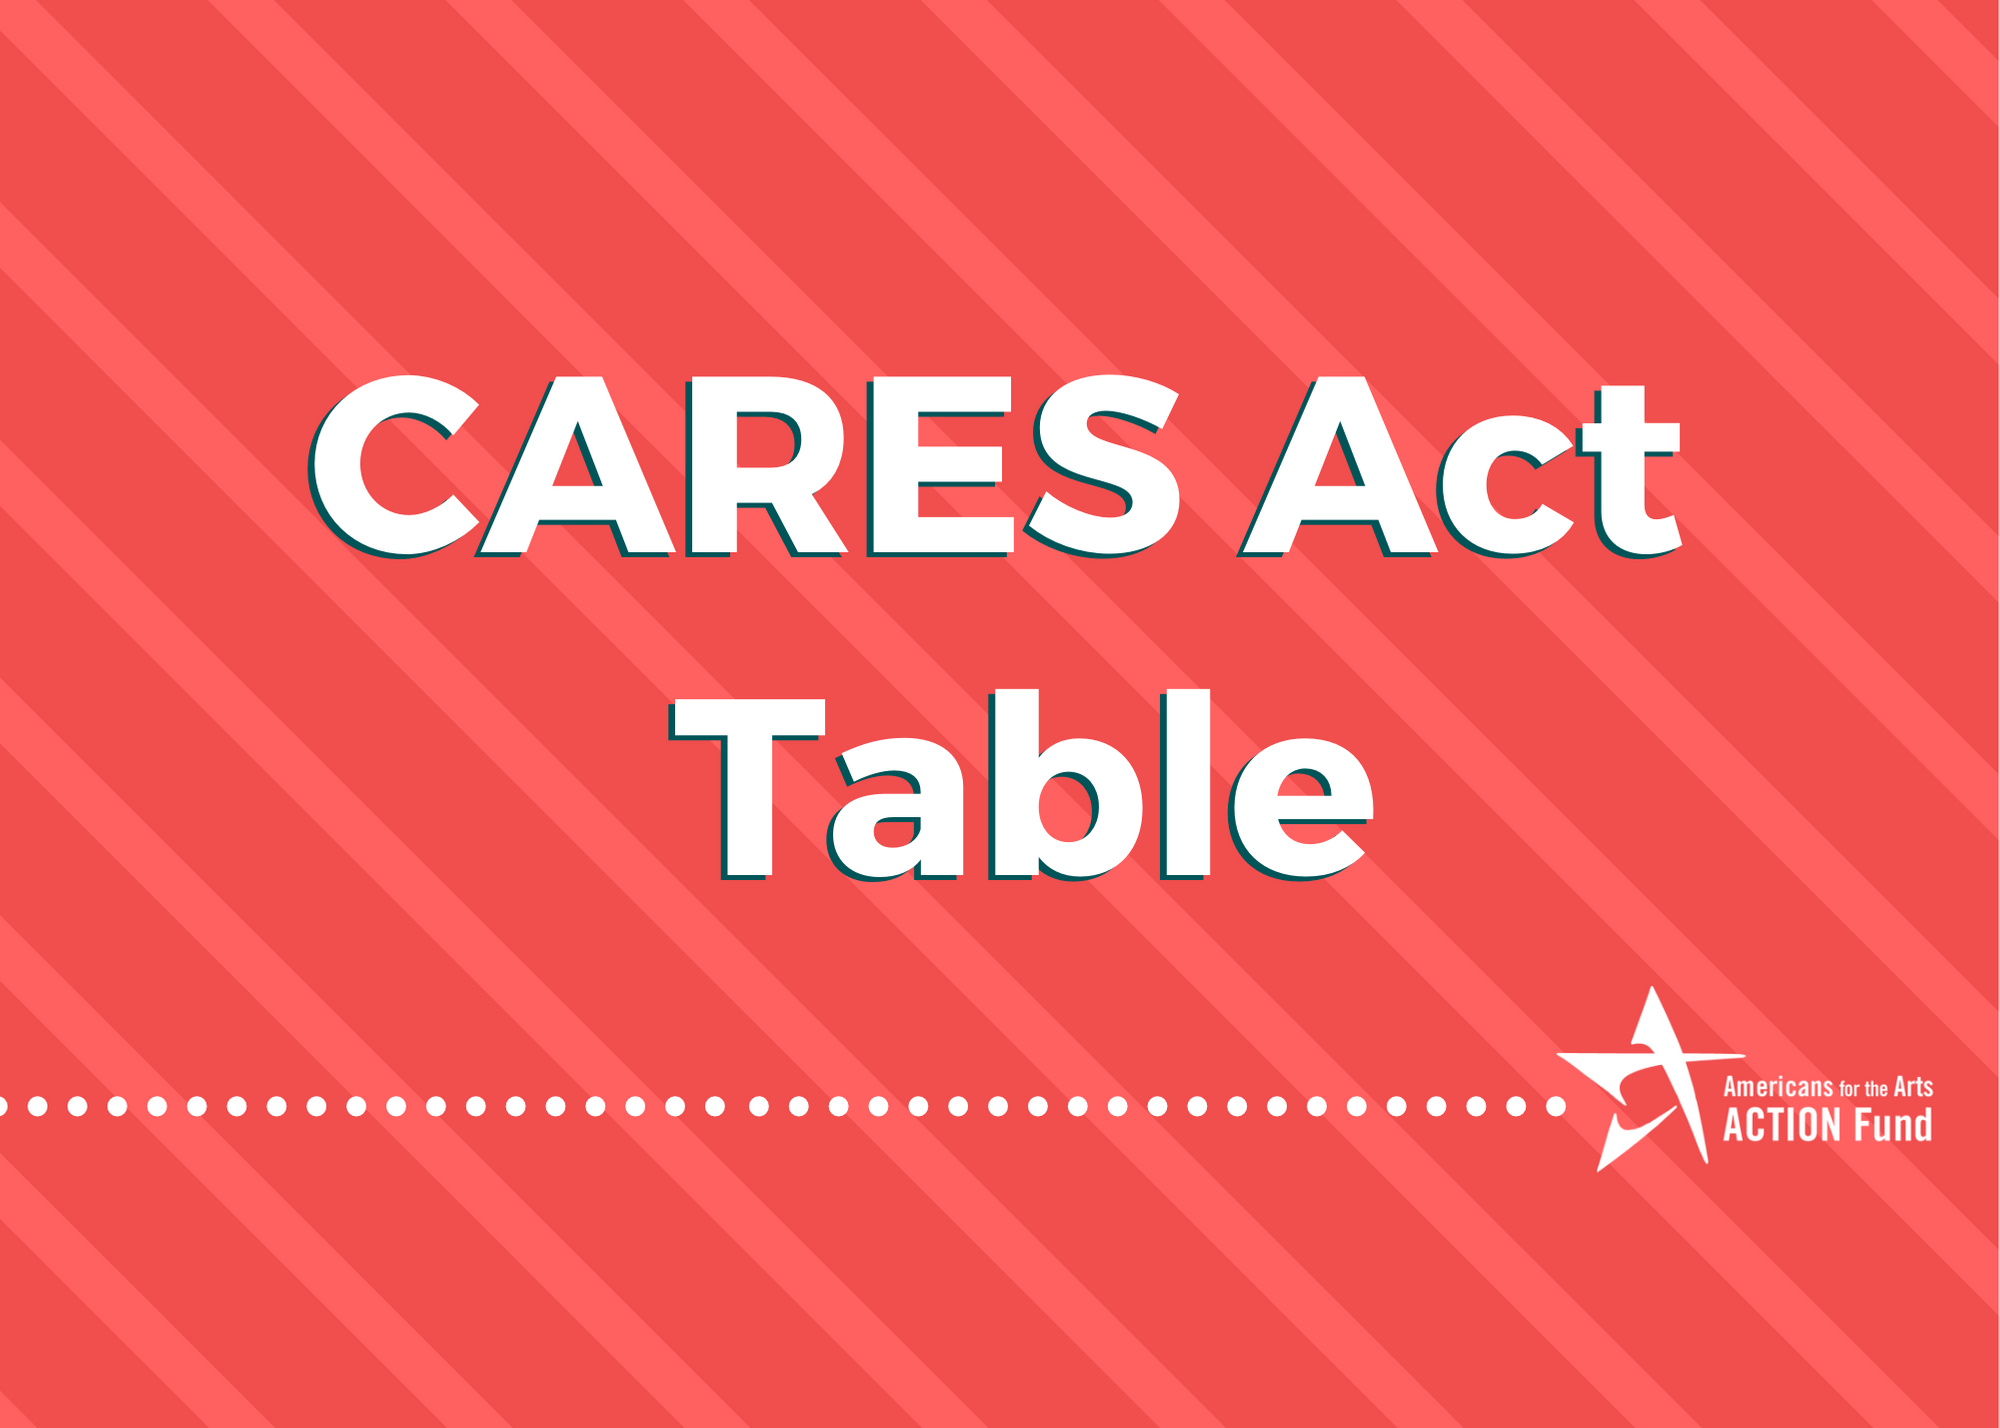 CARES Act Table